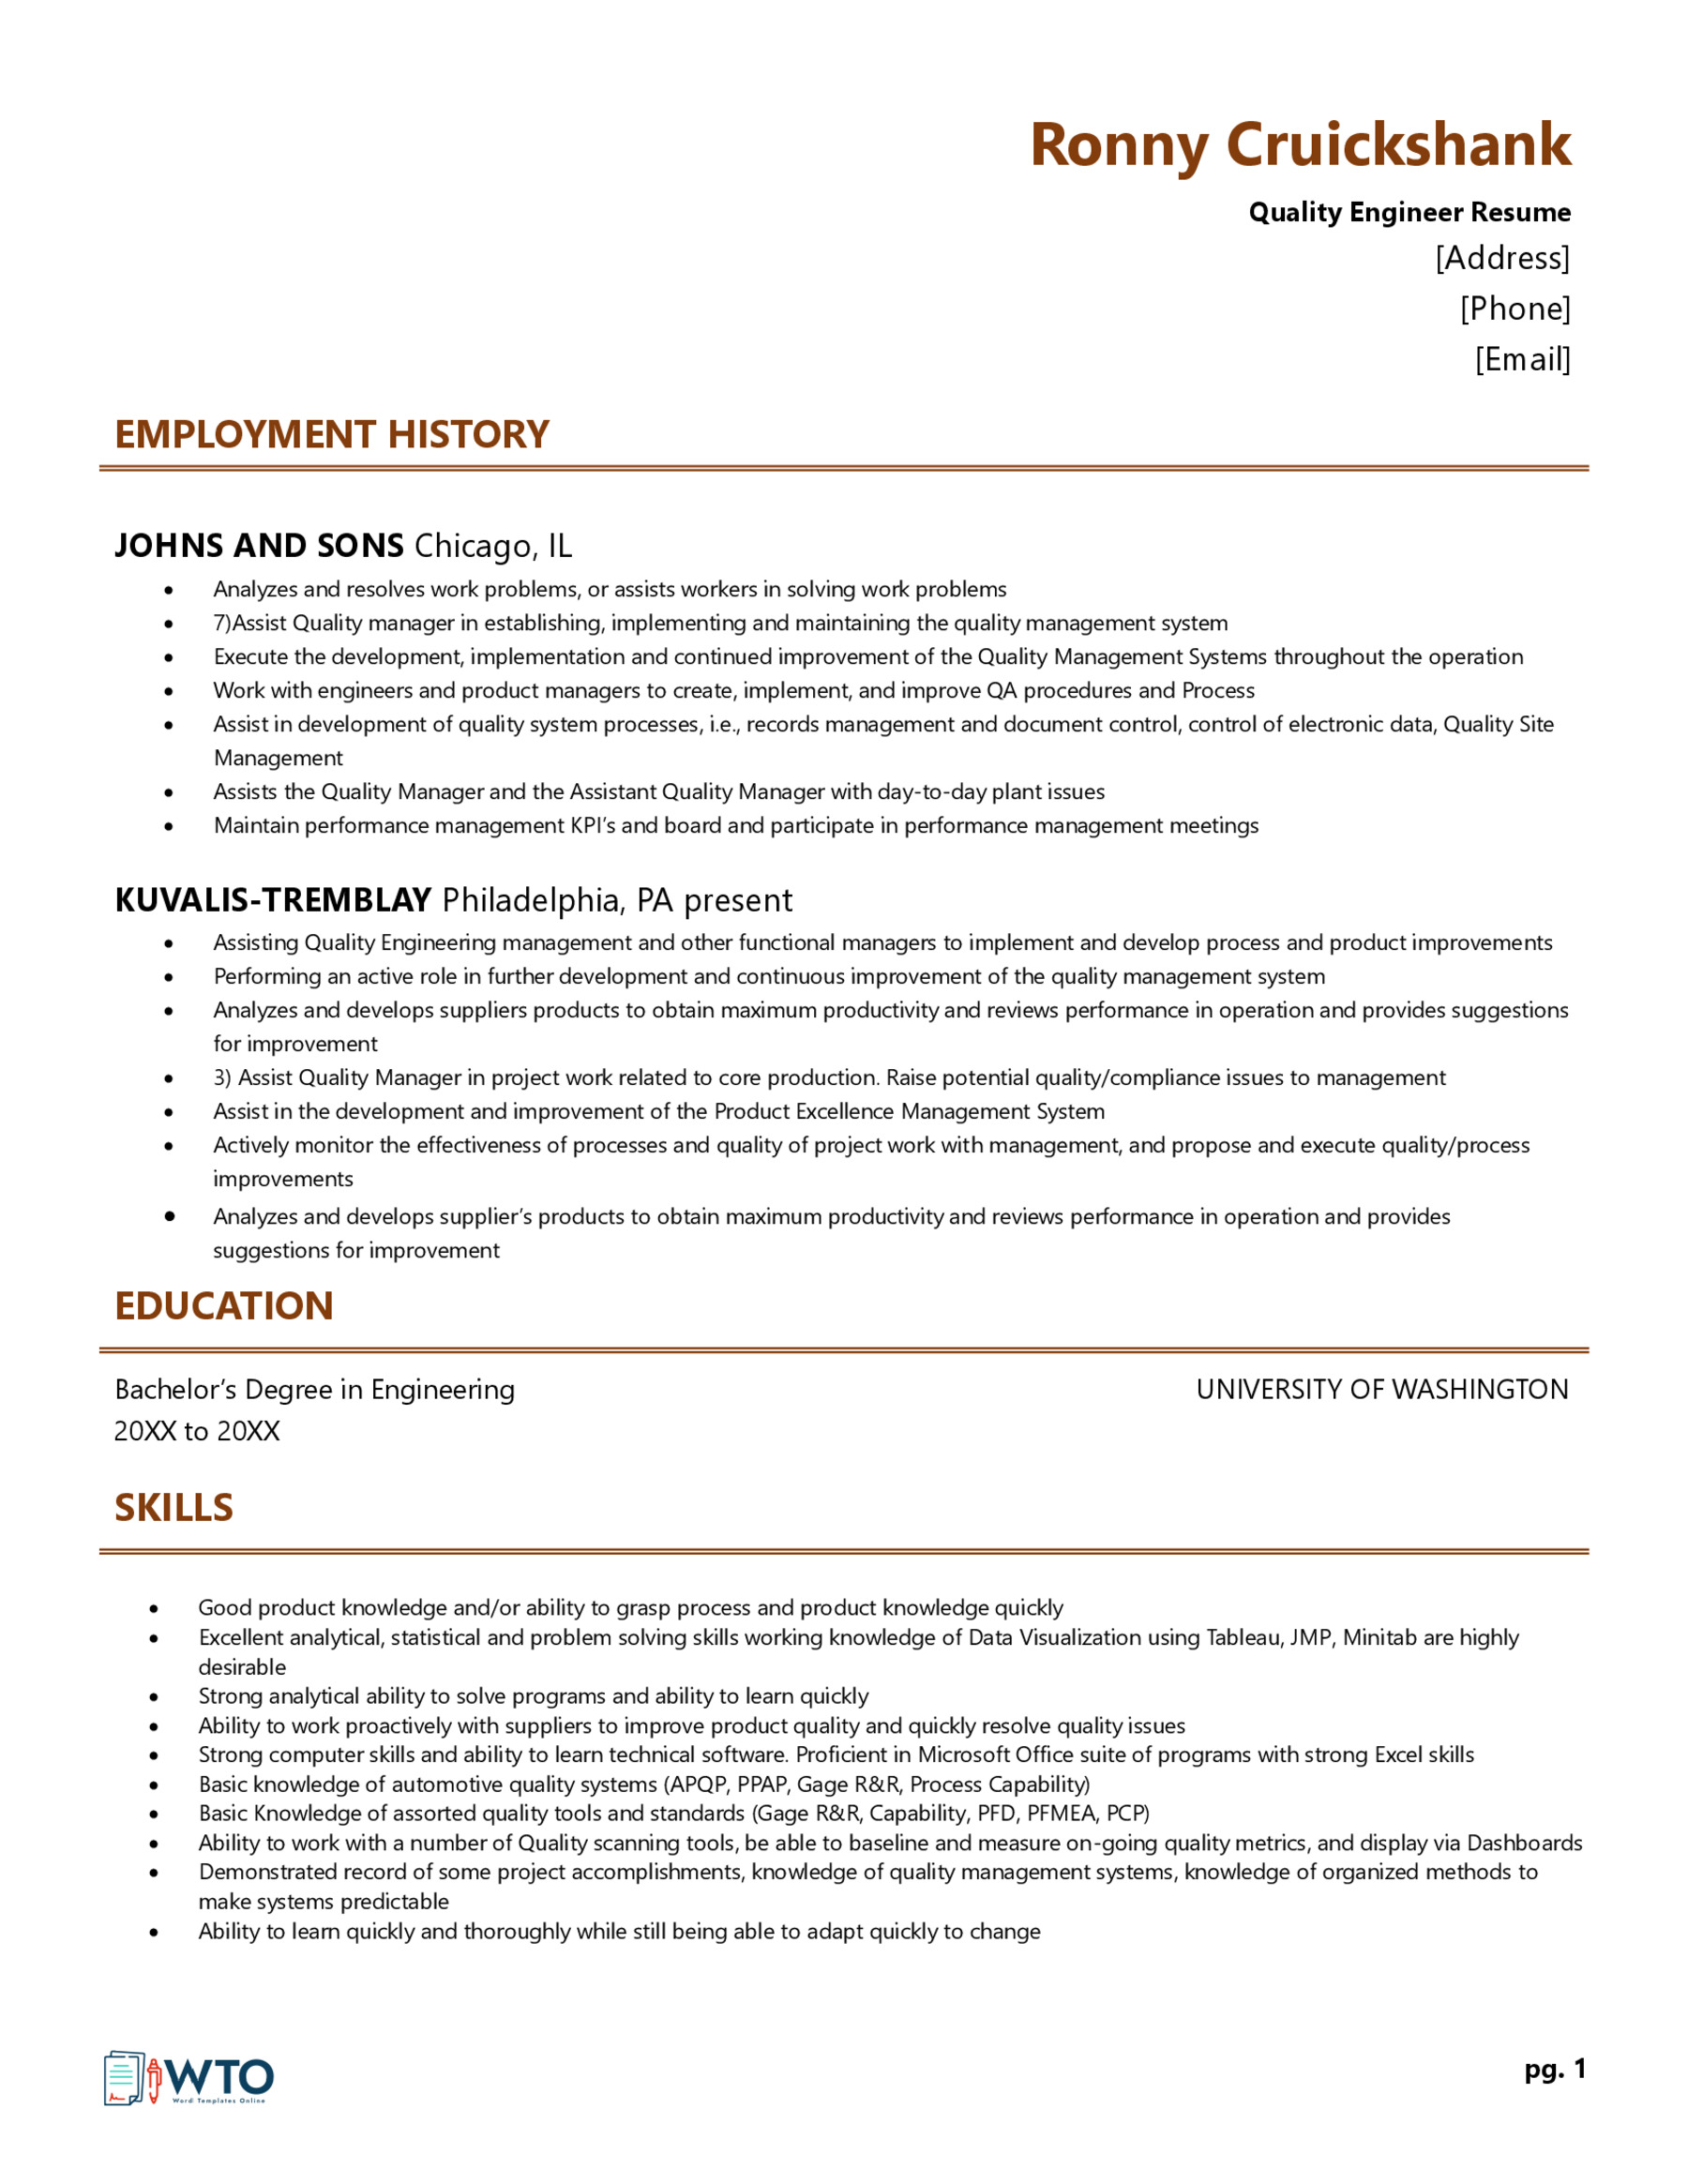 Quality Engineer Resume Template - Customizable Format